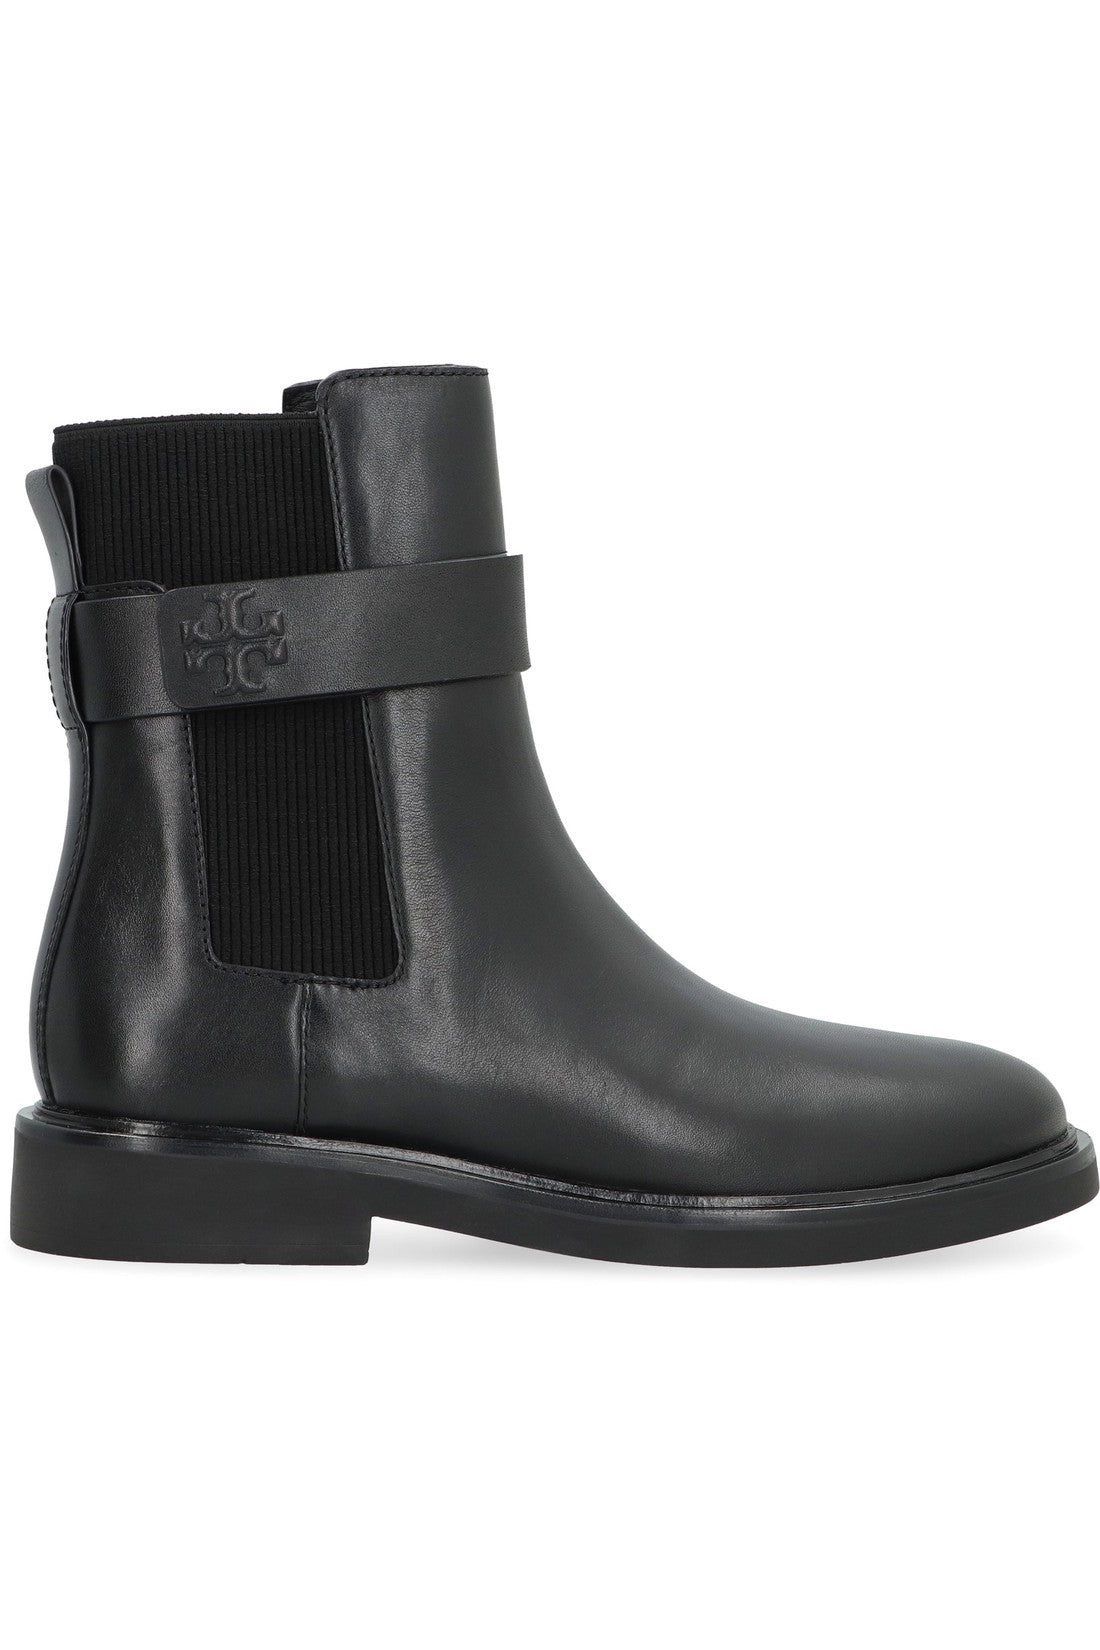 Tory Burch-OUTLET-SALE-Leather Chelsea boots-ARCHIVIST